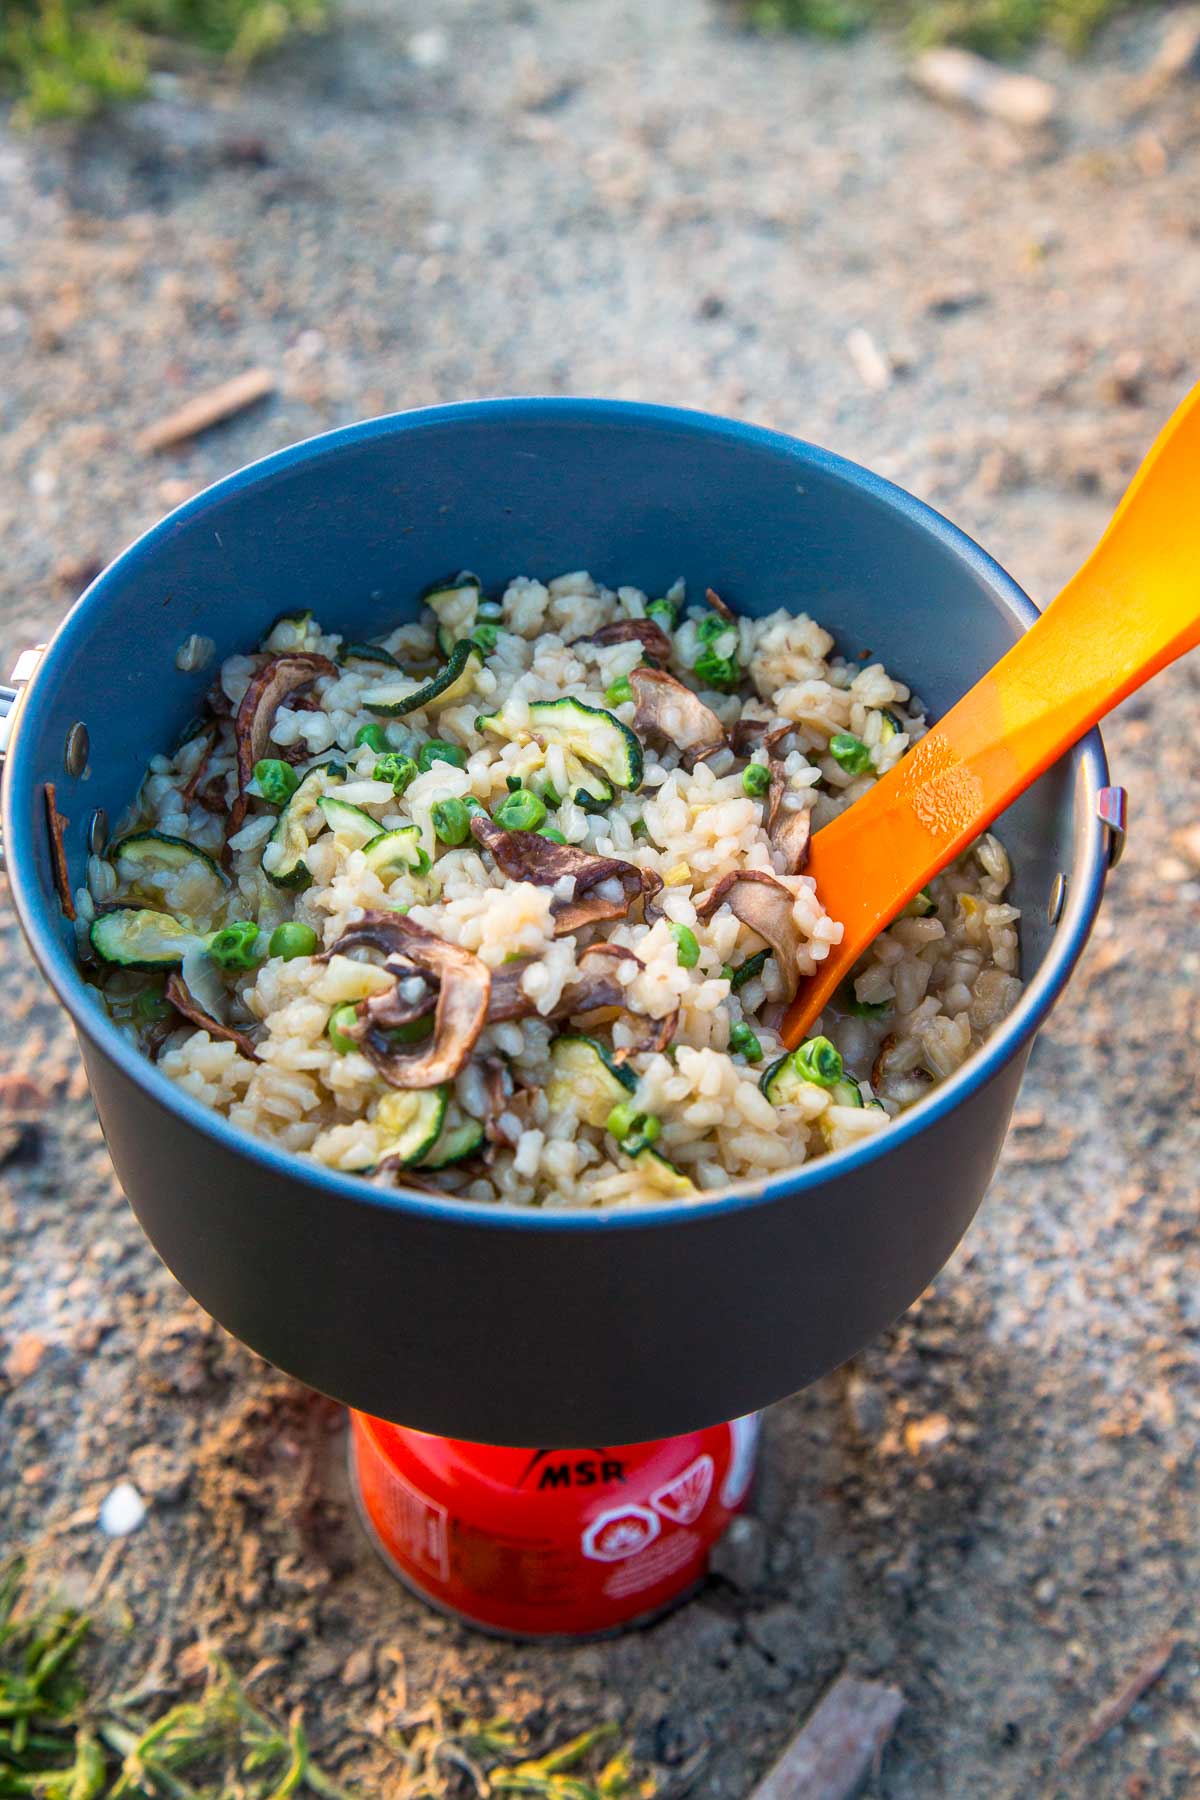 Risotto in a backpacking pot